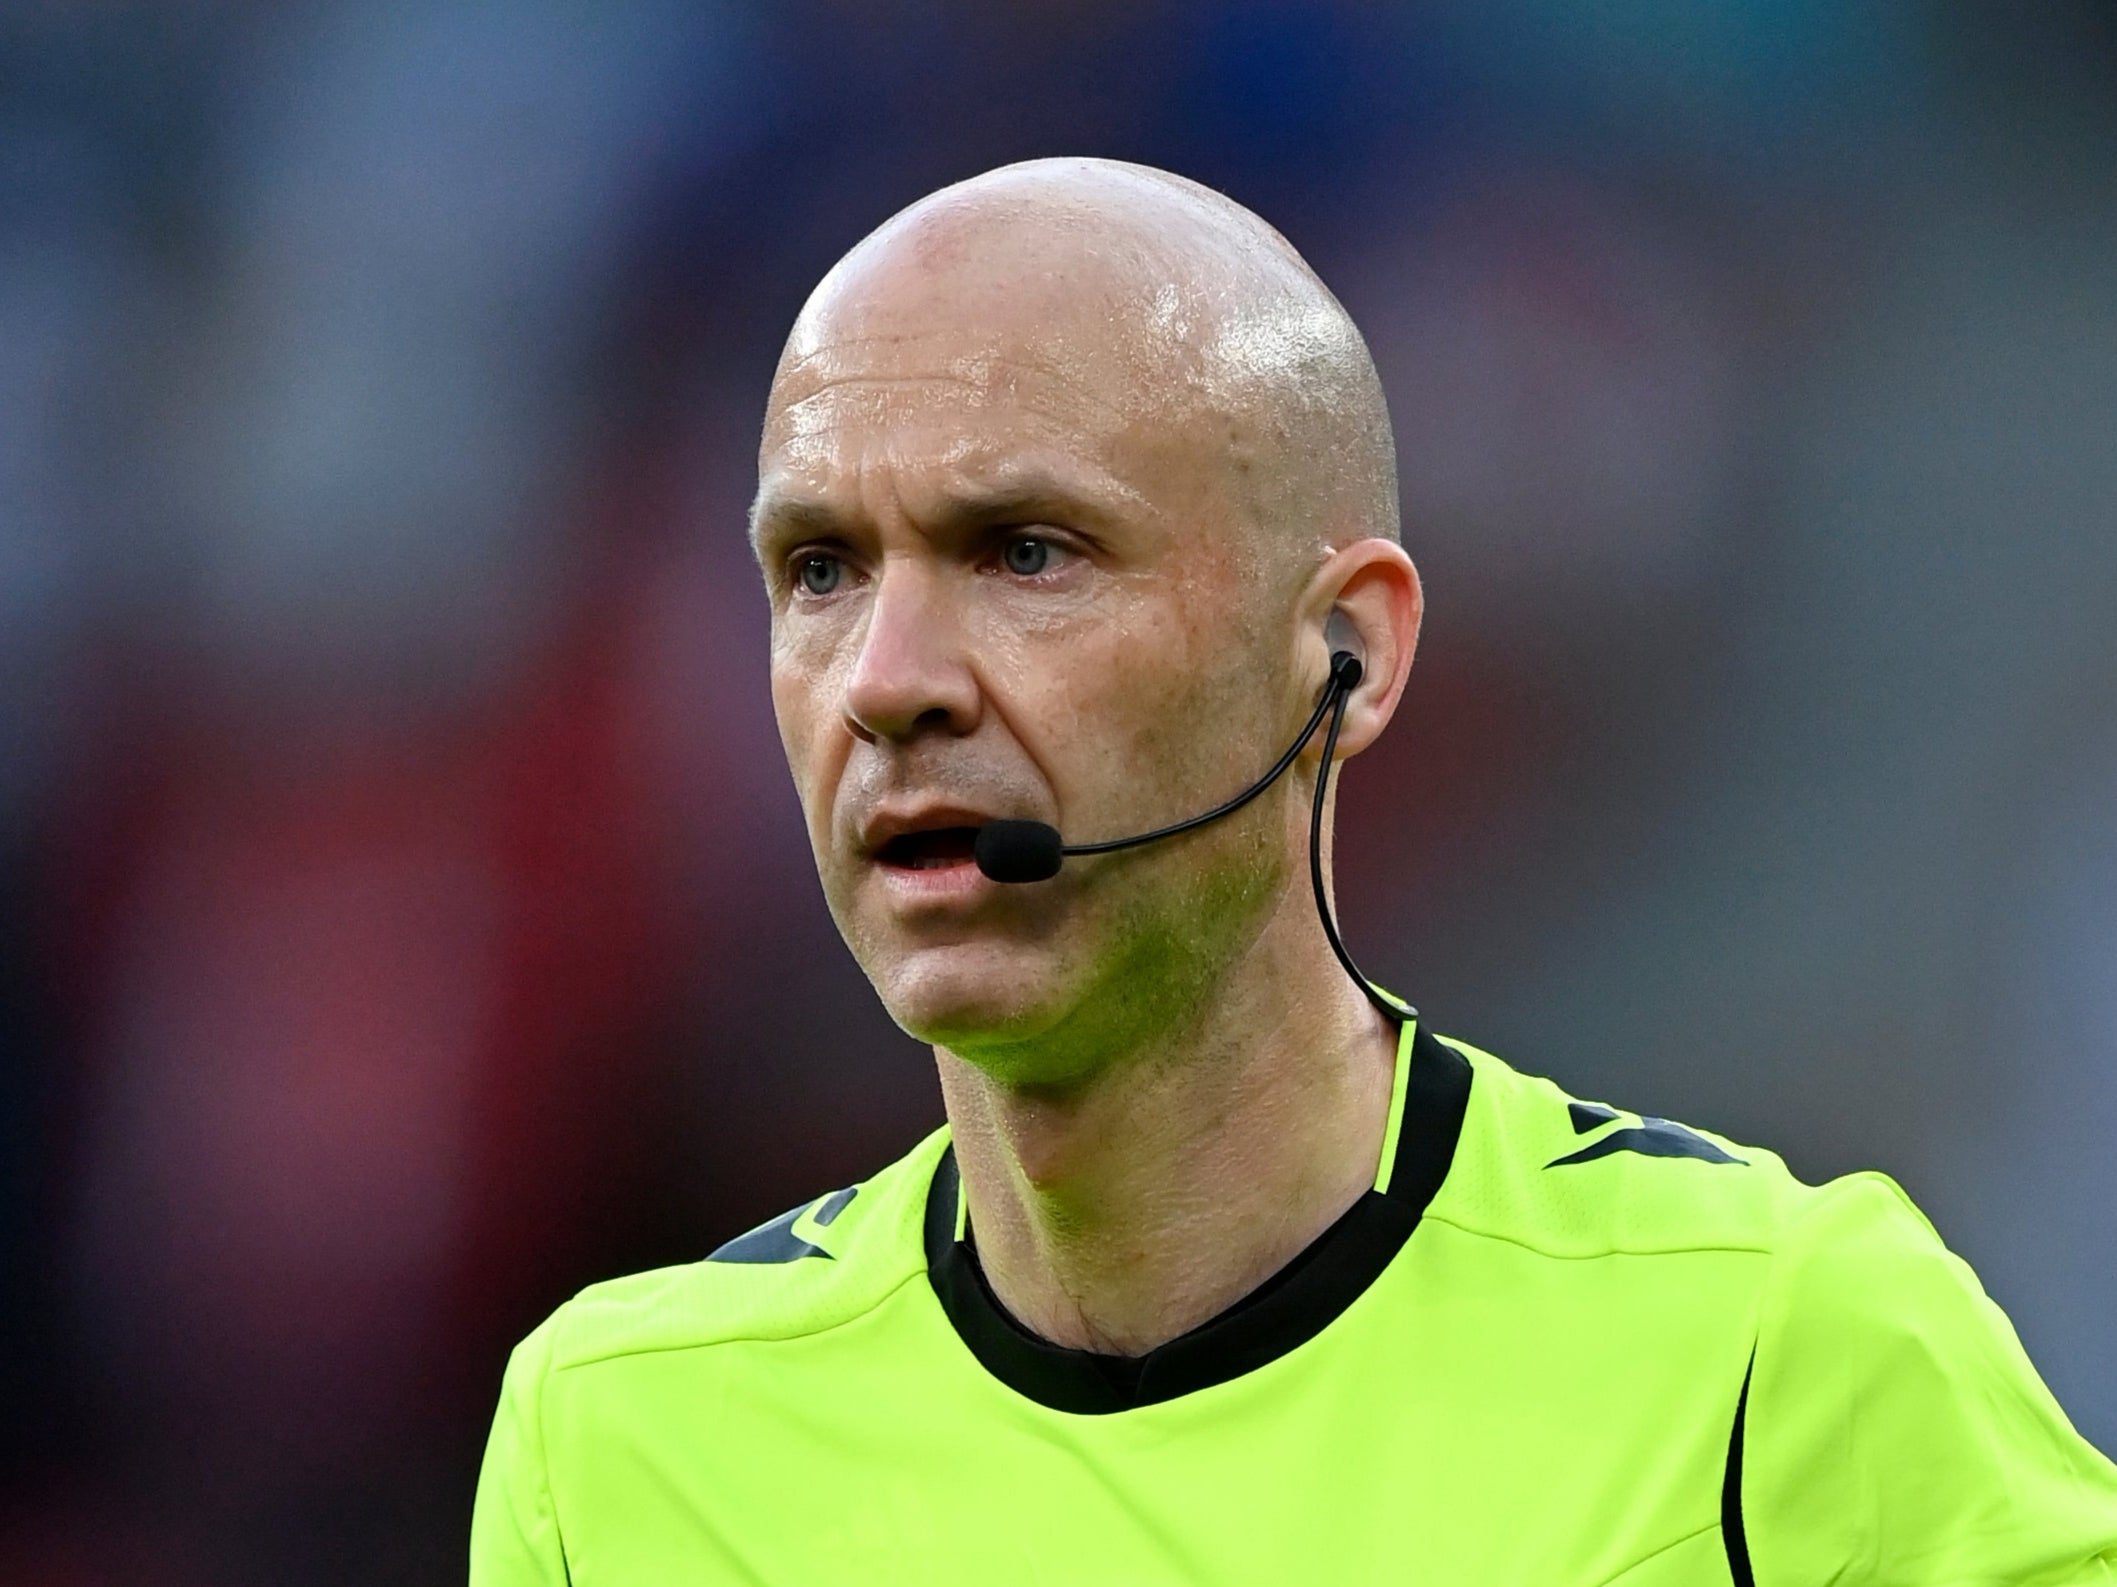 Anthony Taylor has been praised for his quick thinking following Christian Eriksen's cardiac arrest in the Denmark v Finland match on June 12